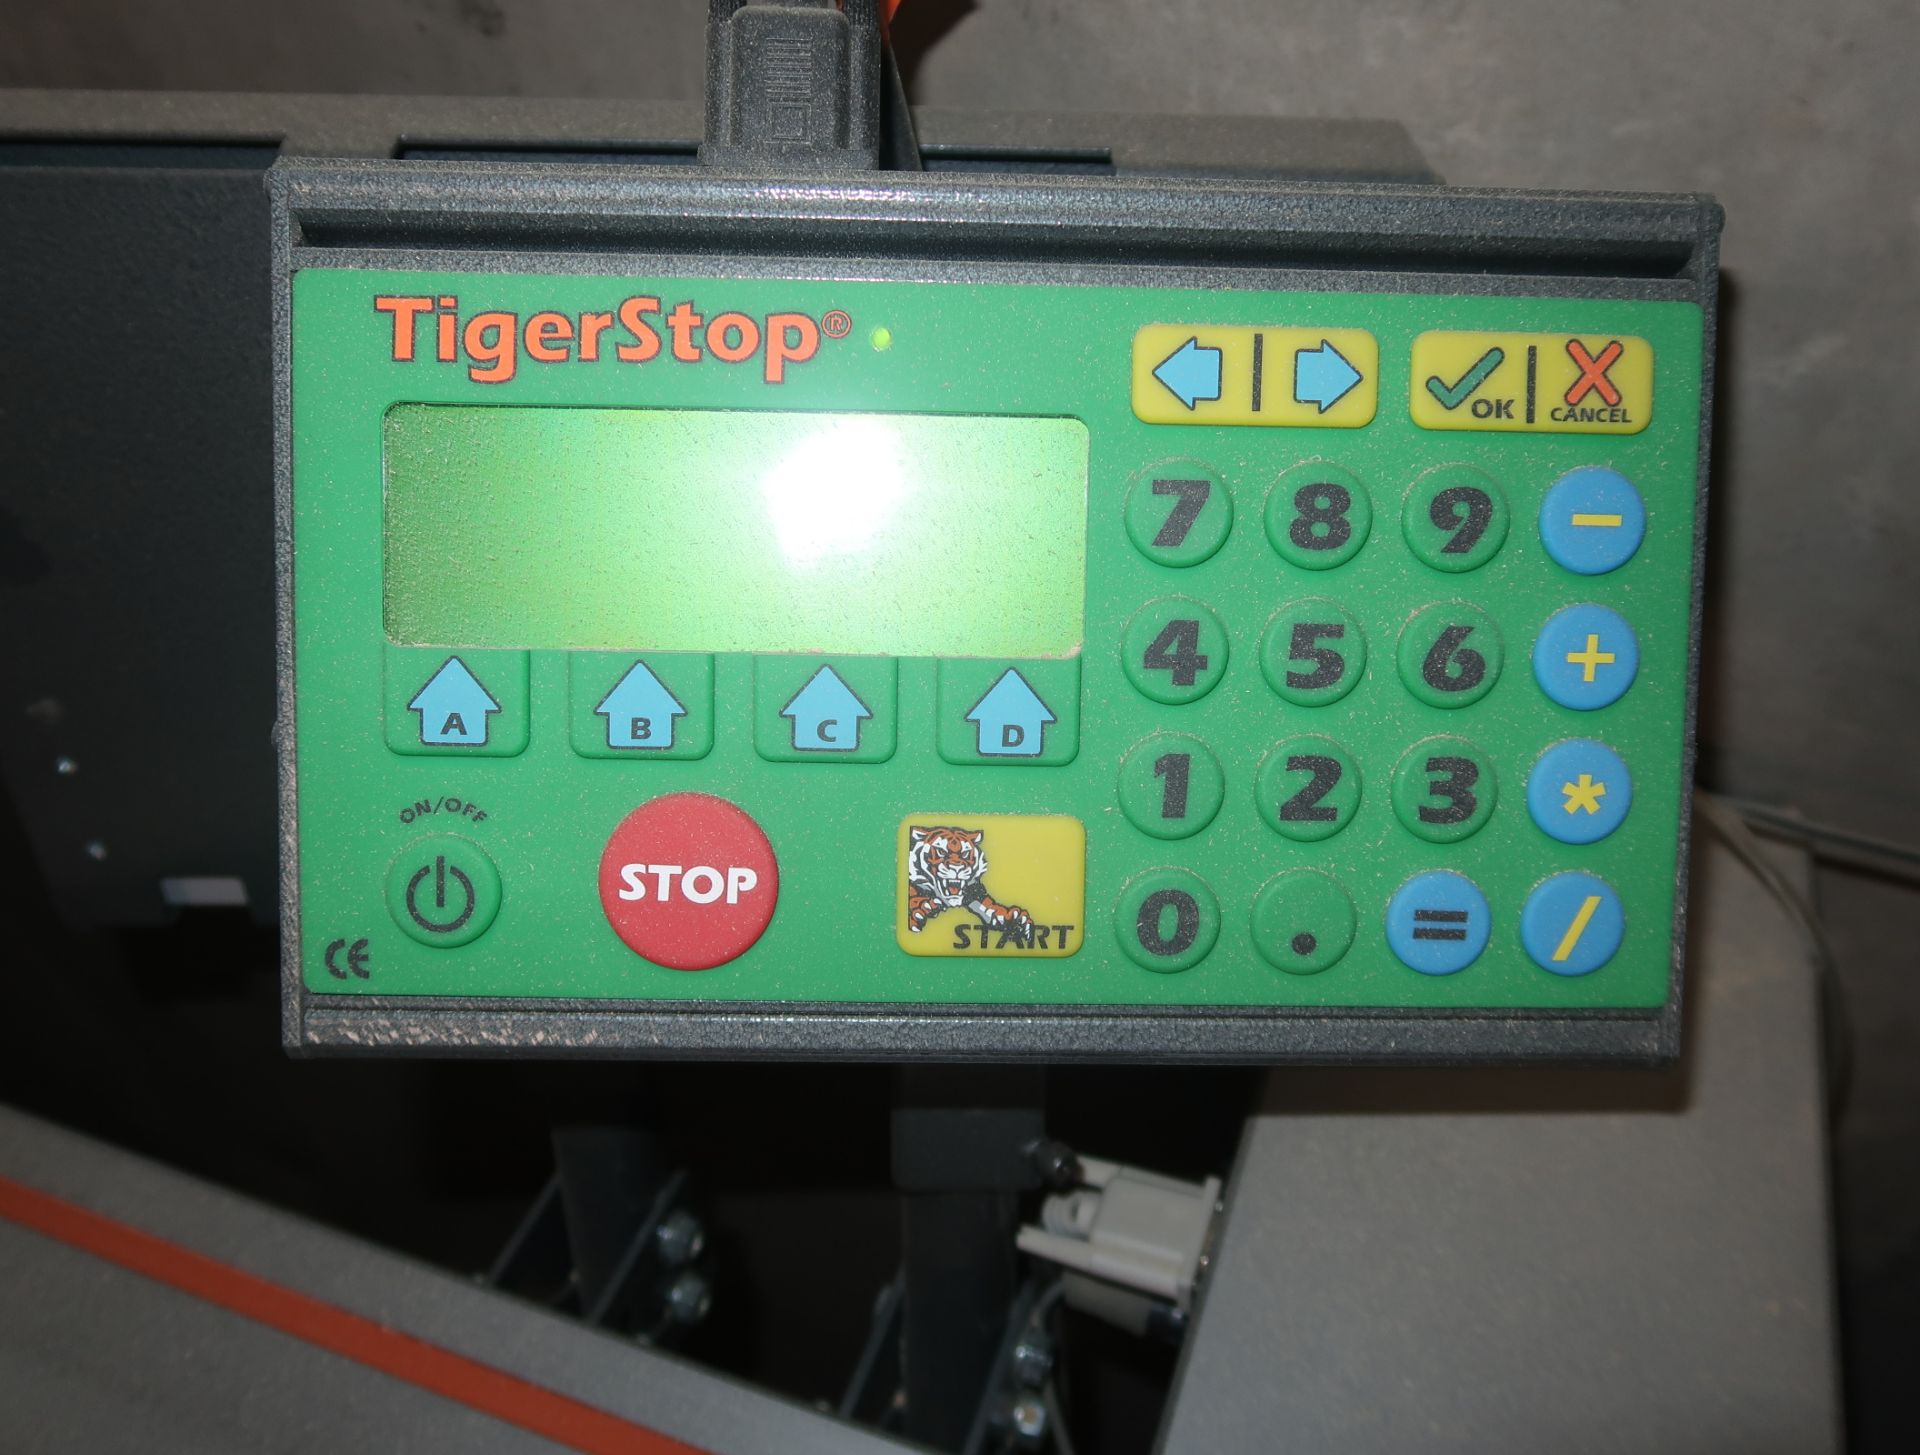 CANTEK UPCUT SAW W/ TIGER ST0P & SUPPORT TABLES, MDL. CANPCS14L, SN. 1906001, 230V, 5HP - Image 2 of 4